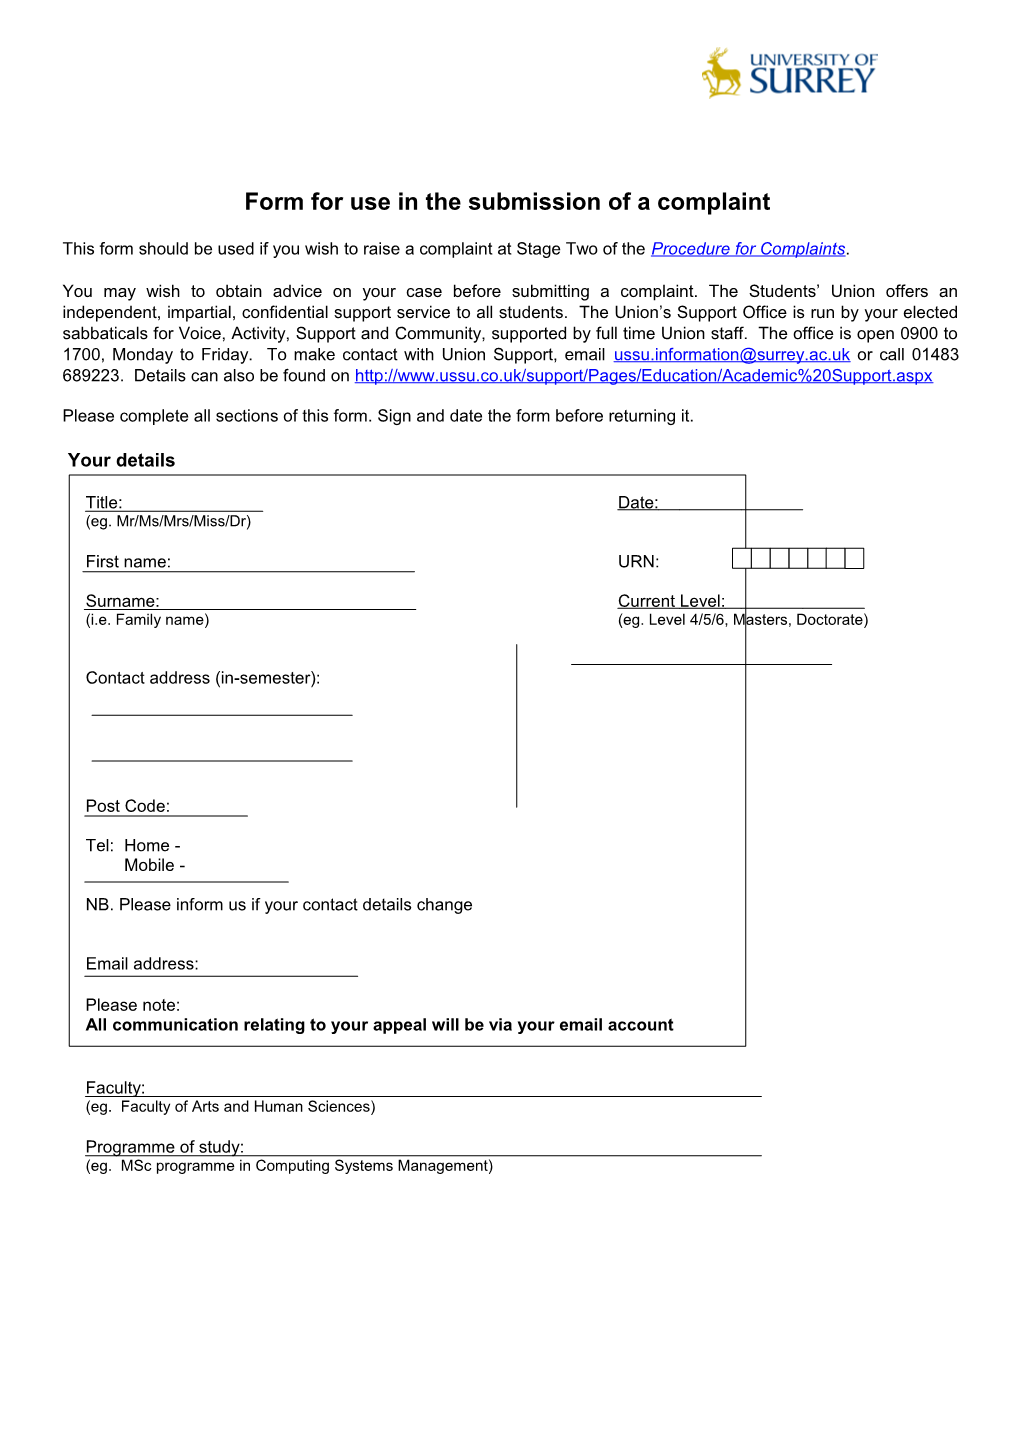 Form for Use in the Submission of a Complaint